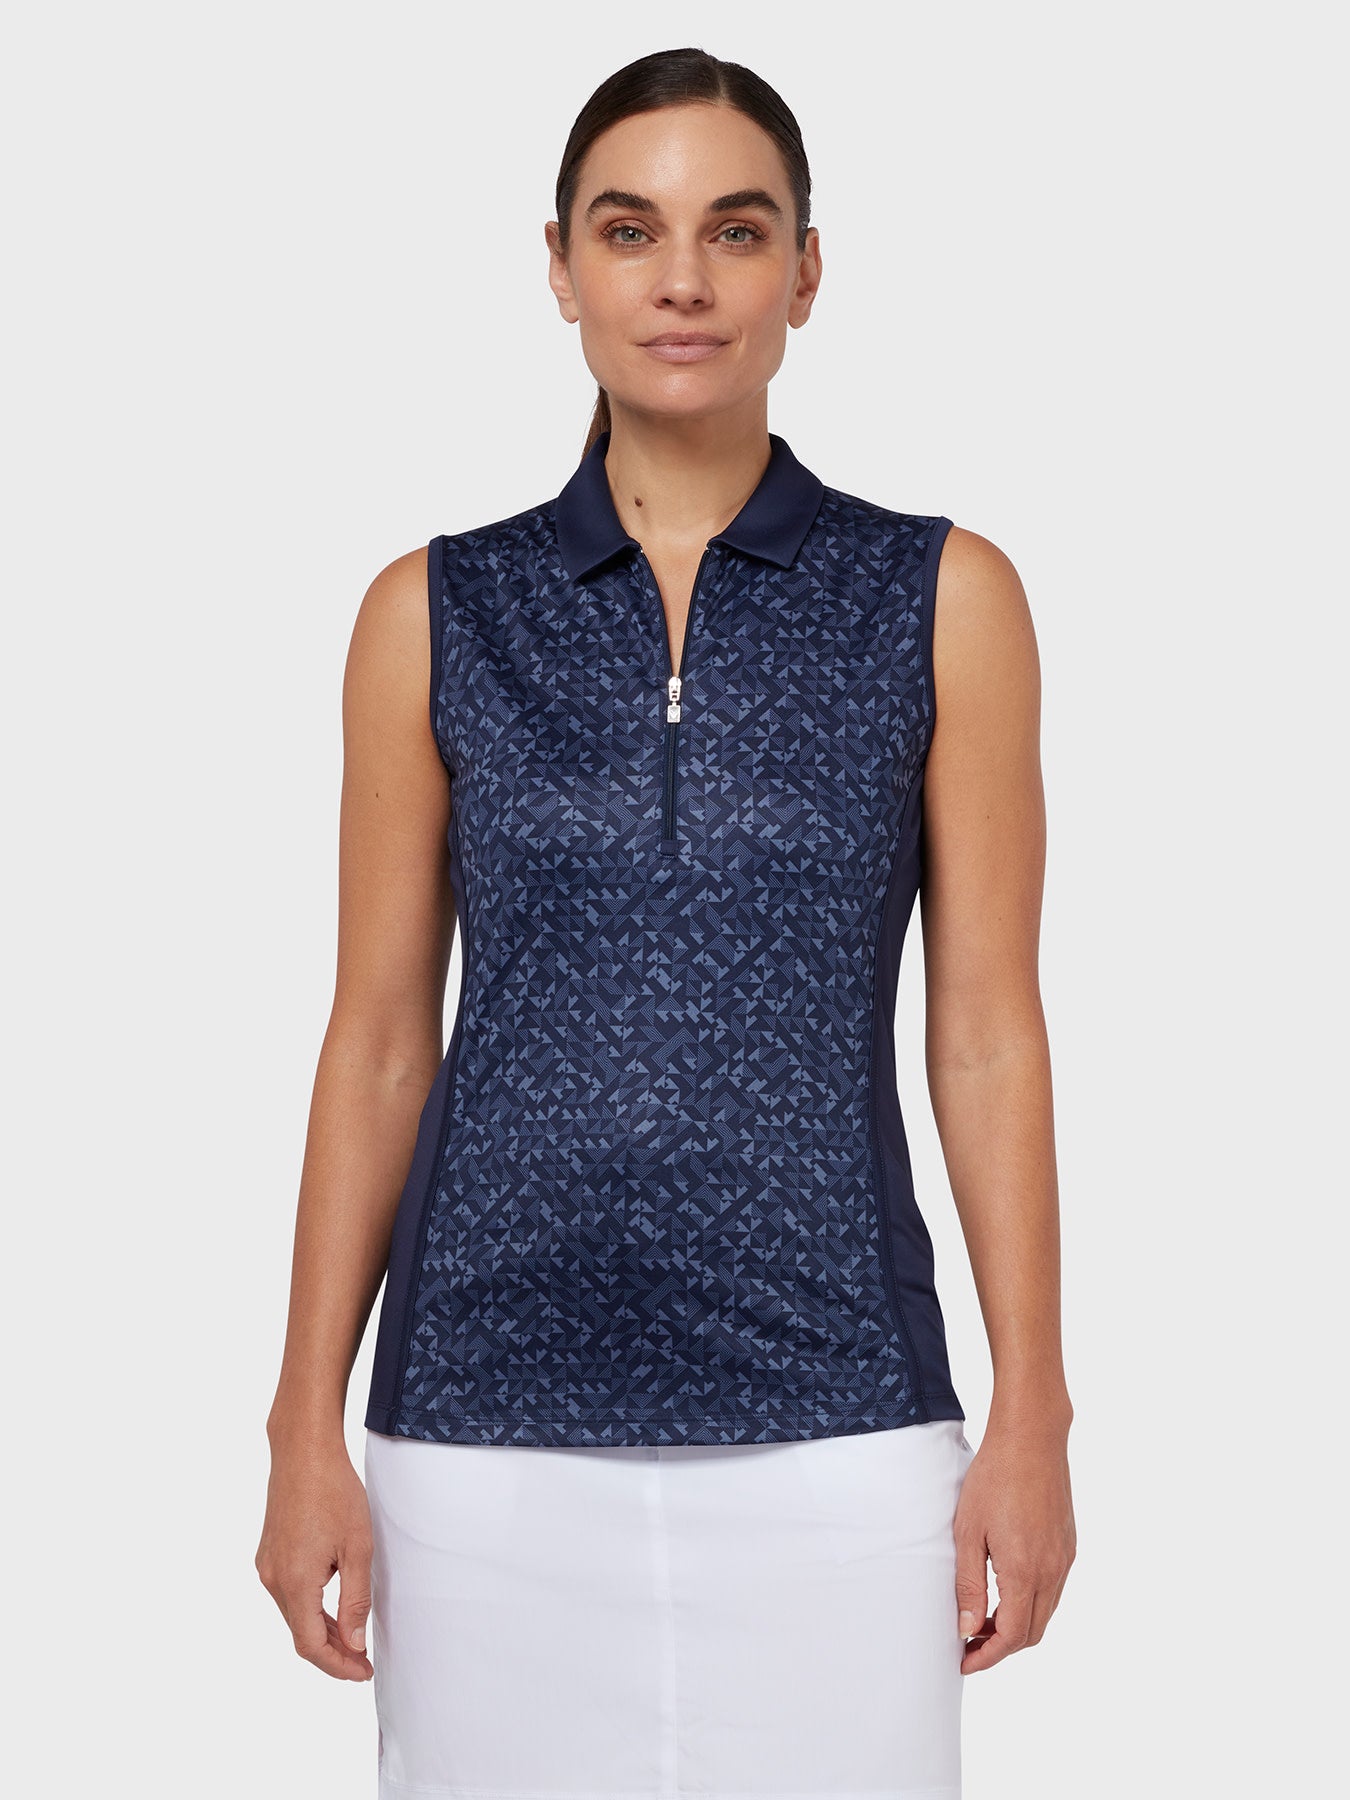 View Shape Shifter Geo Print Womens Golf Polo In Peacoat Peacoat M information